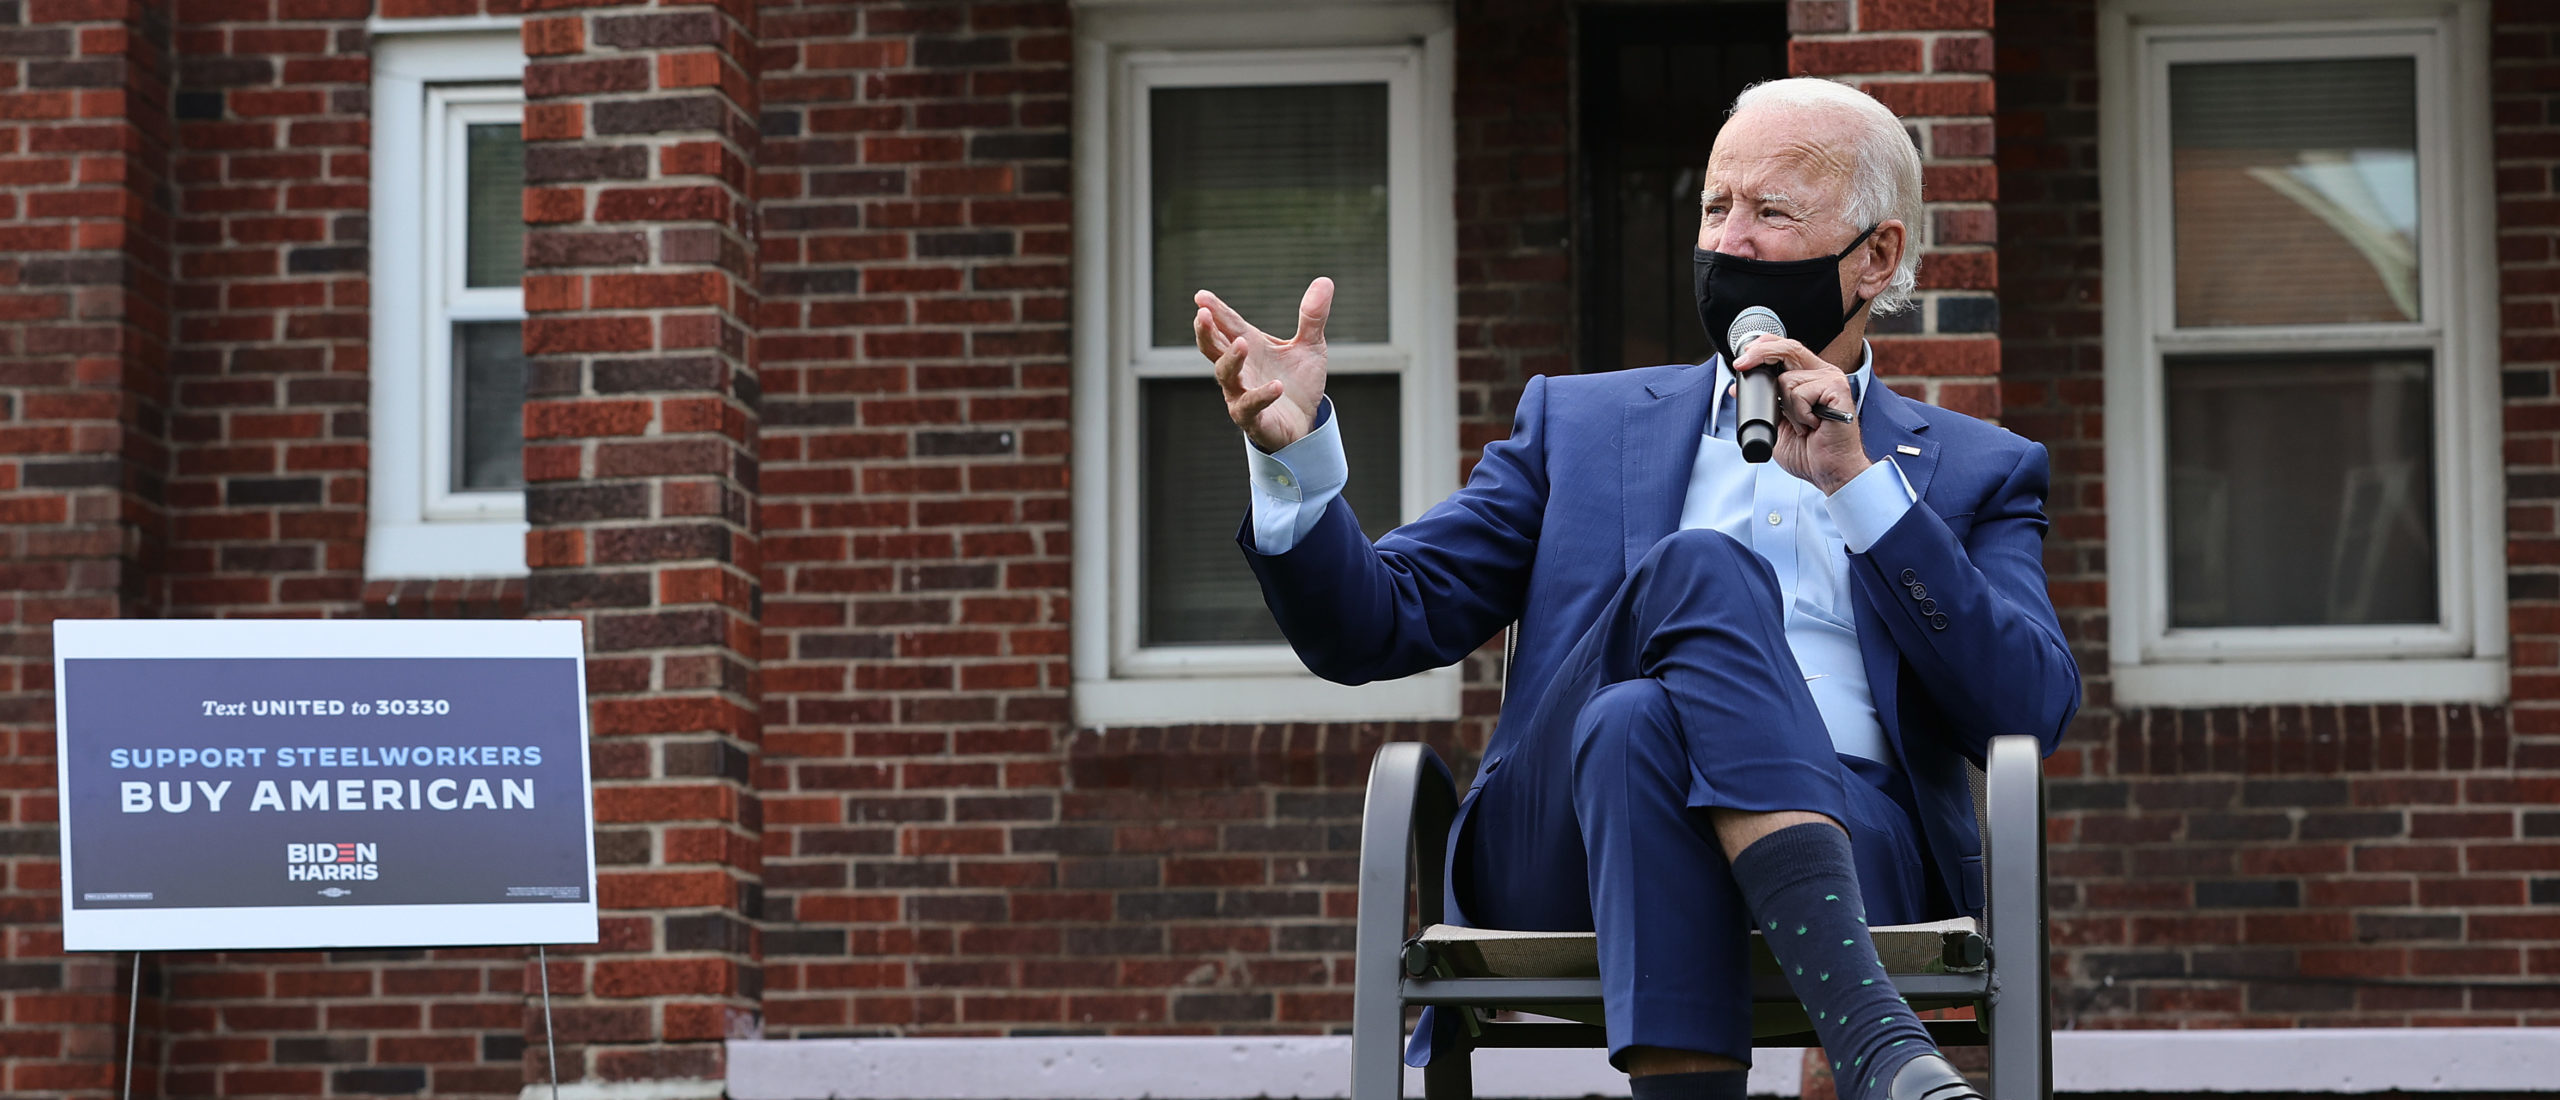 DETROIT, MICHIGAN - SEPTEMBER 09: Wearing a face mask to reduce the risk posed by the coronavirus, Democratic presidential nominee Joe Biden talks with members of the United Steelworkers union in a supporter's back yard September 09, 2020 in Detroit, Michigan. Biden is campaigning in Michigan, which President Donald Trump won in 2016 by less than 11,000 votes, the narrowest margin of victory in state's presidential election history. (Photo by Chip Somodevilla/Getty Images)